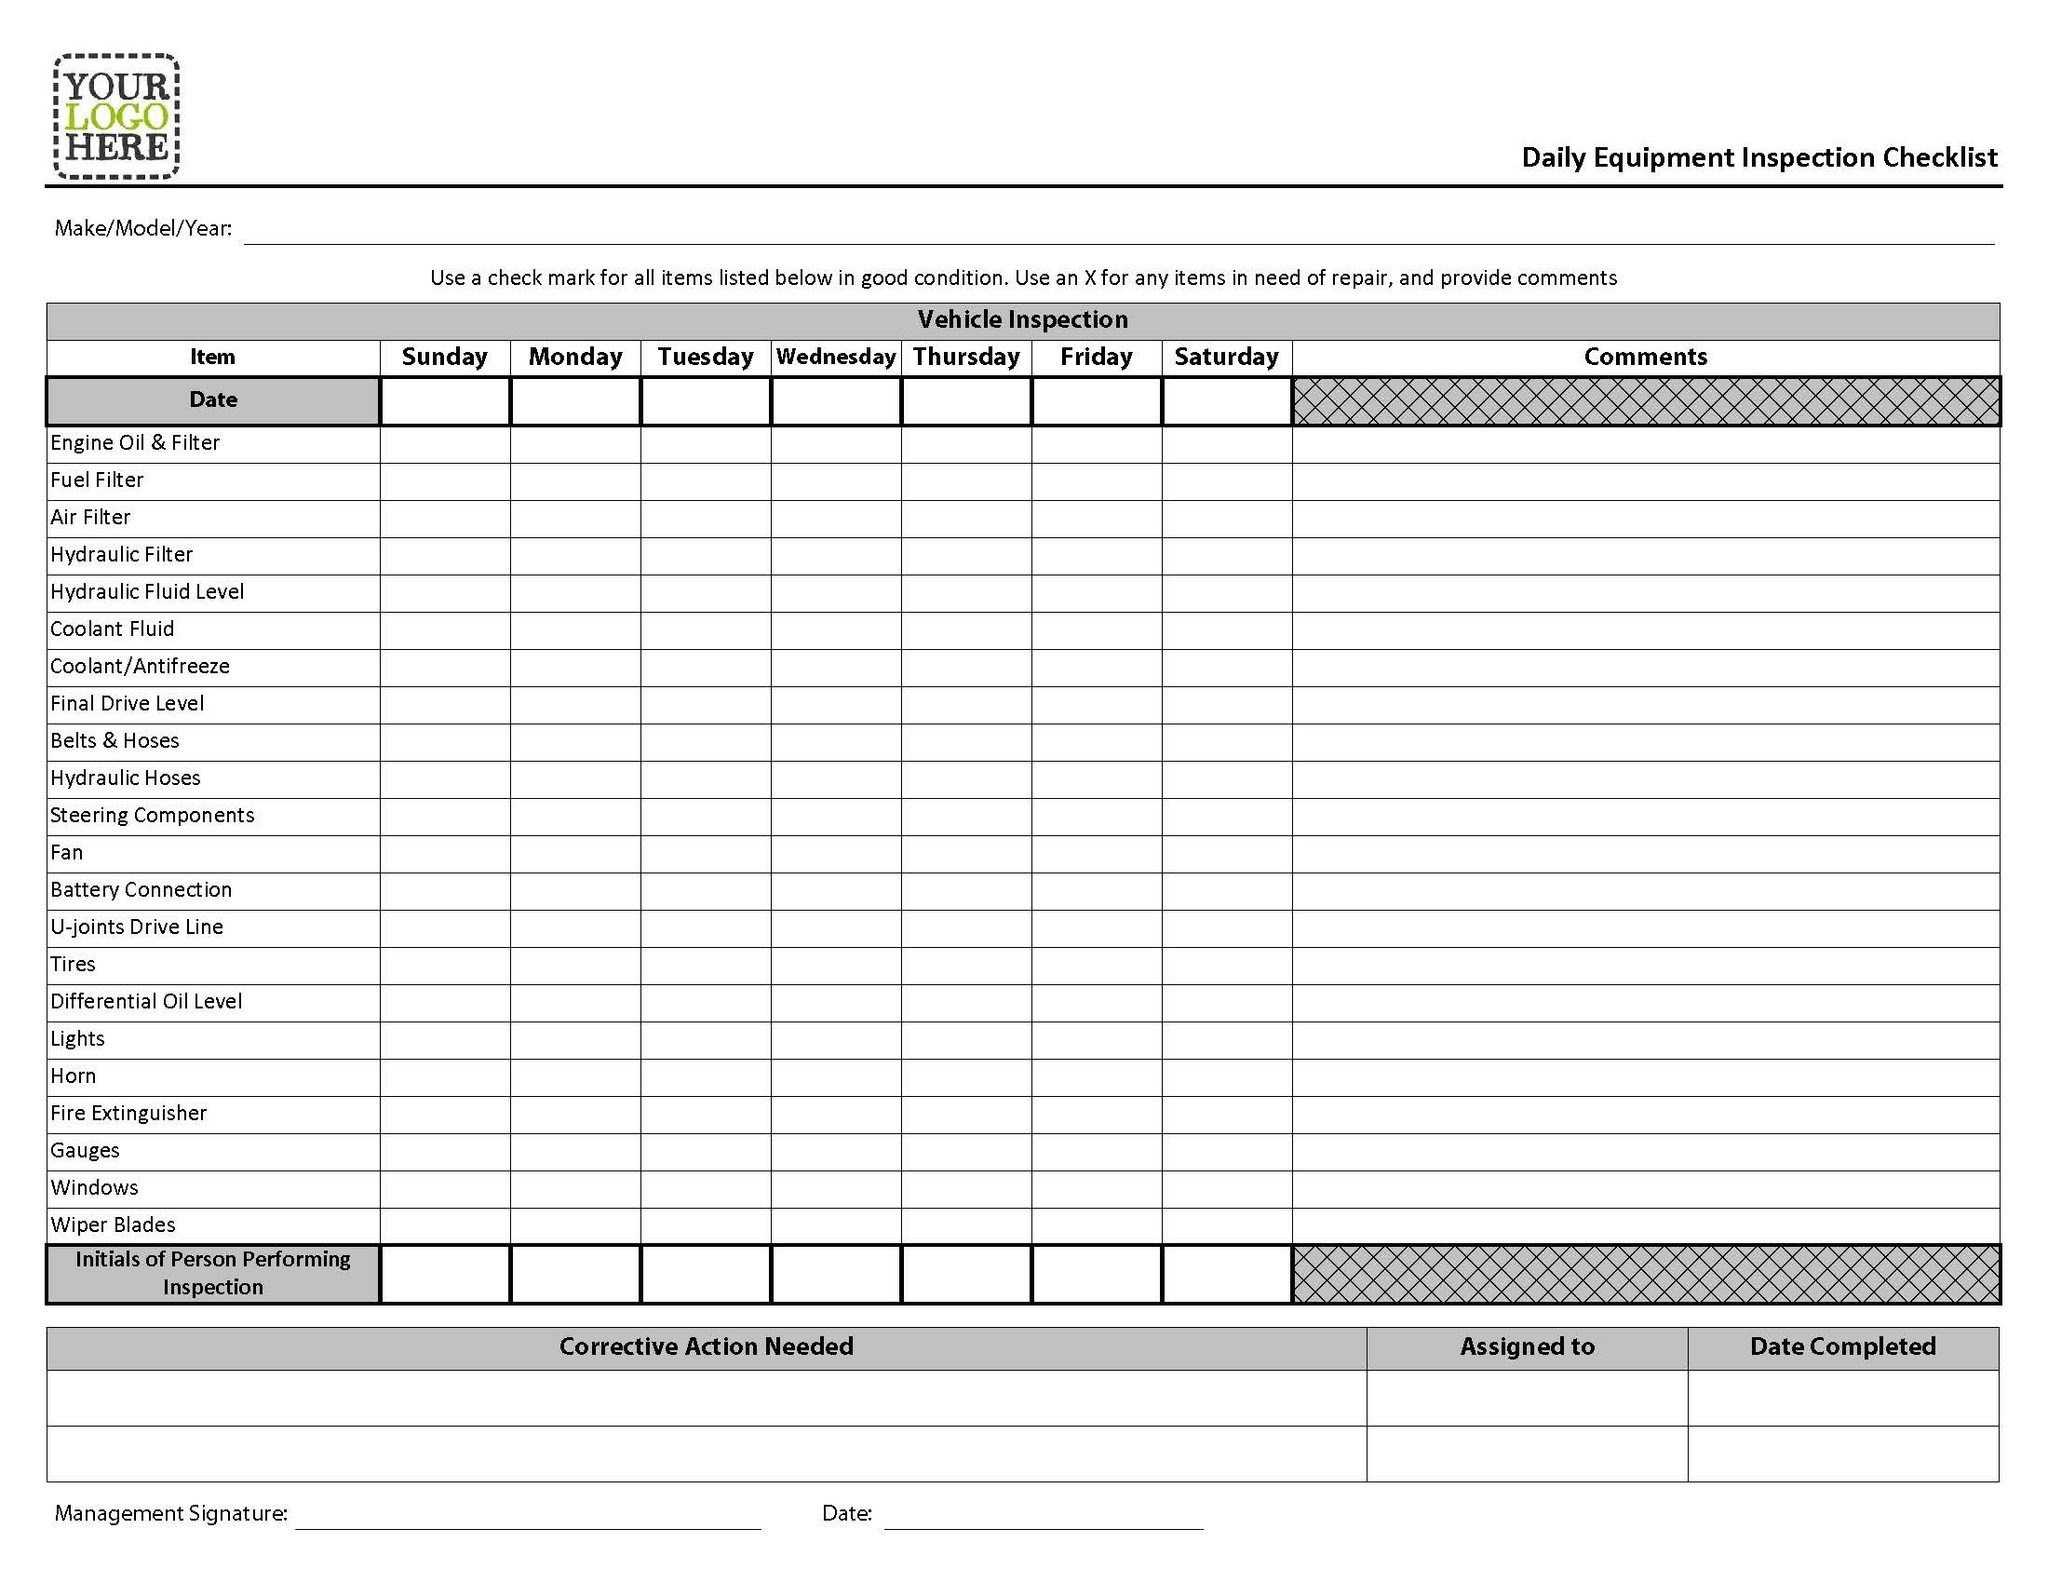 Machine Shop Inspection Report Template - Atlantaauctionco With Regard To Machine Shop Inspection Report Template